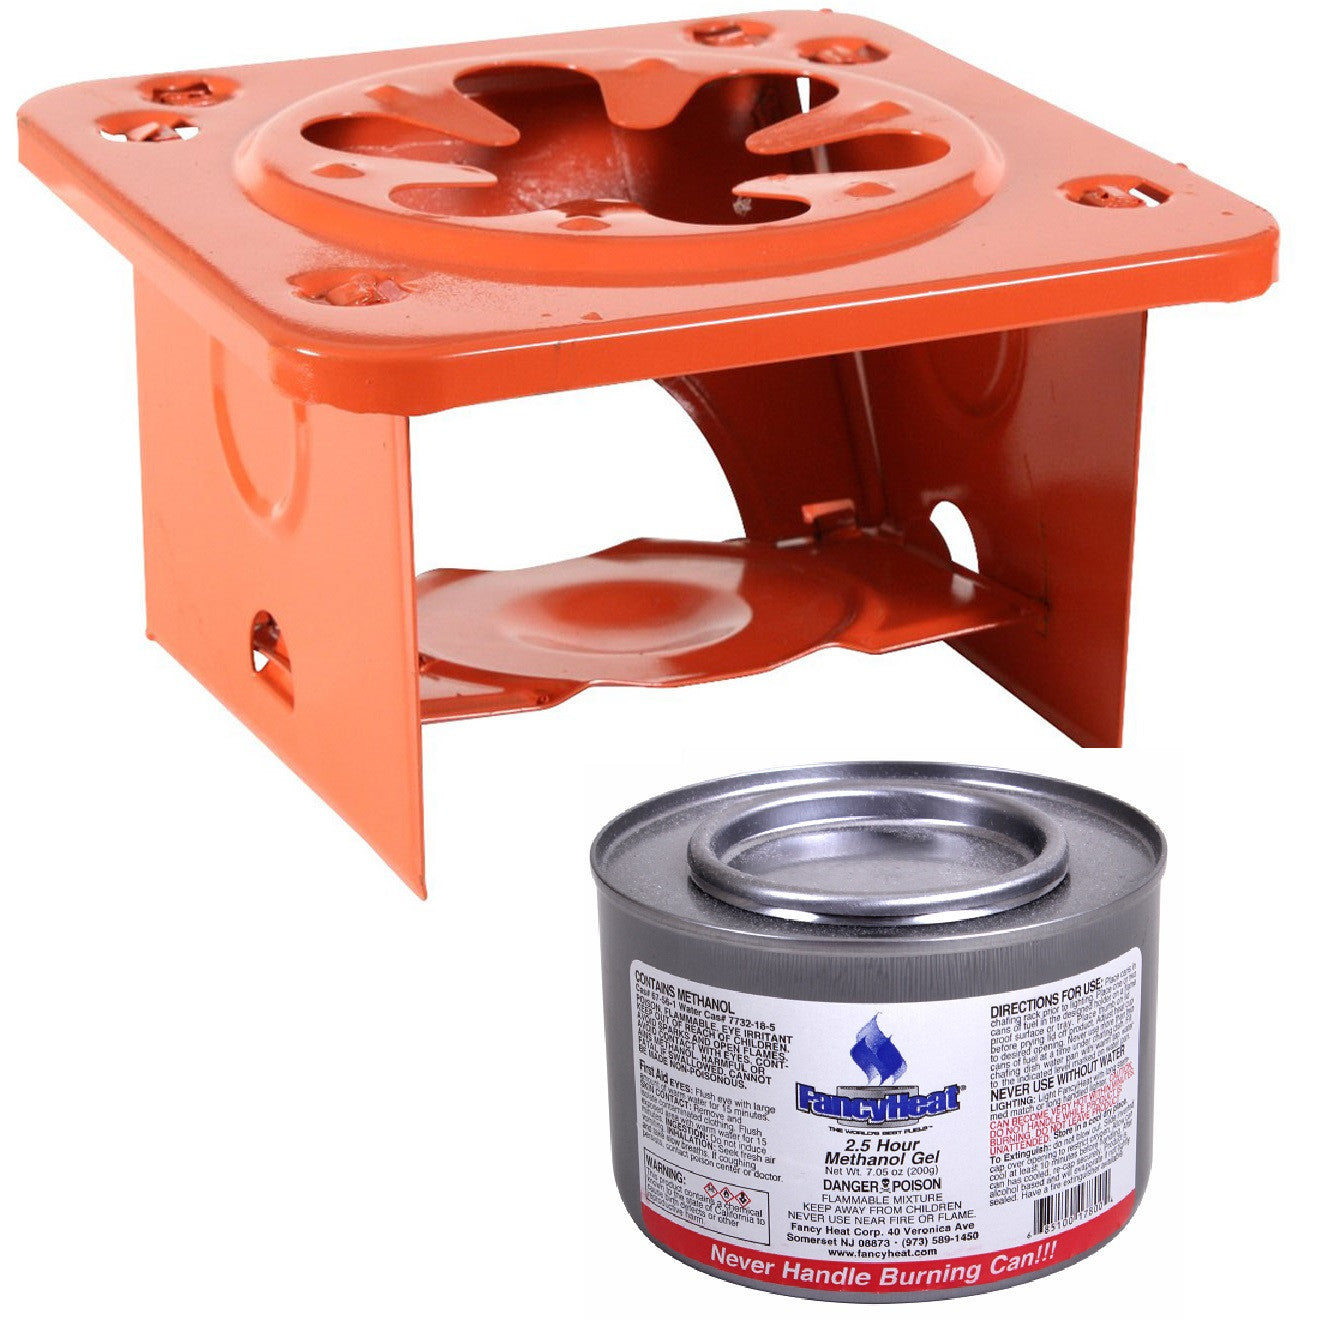 Folding Pocket Stove WITH COOKING FUEL CAN Compact Outdoor Camp Single Burner